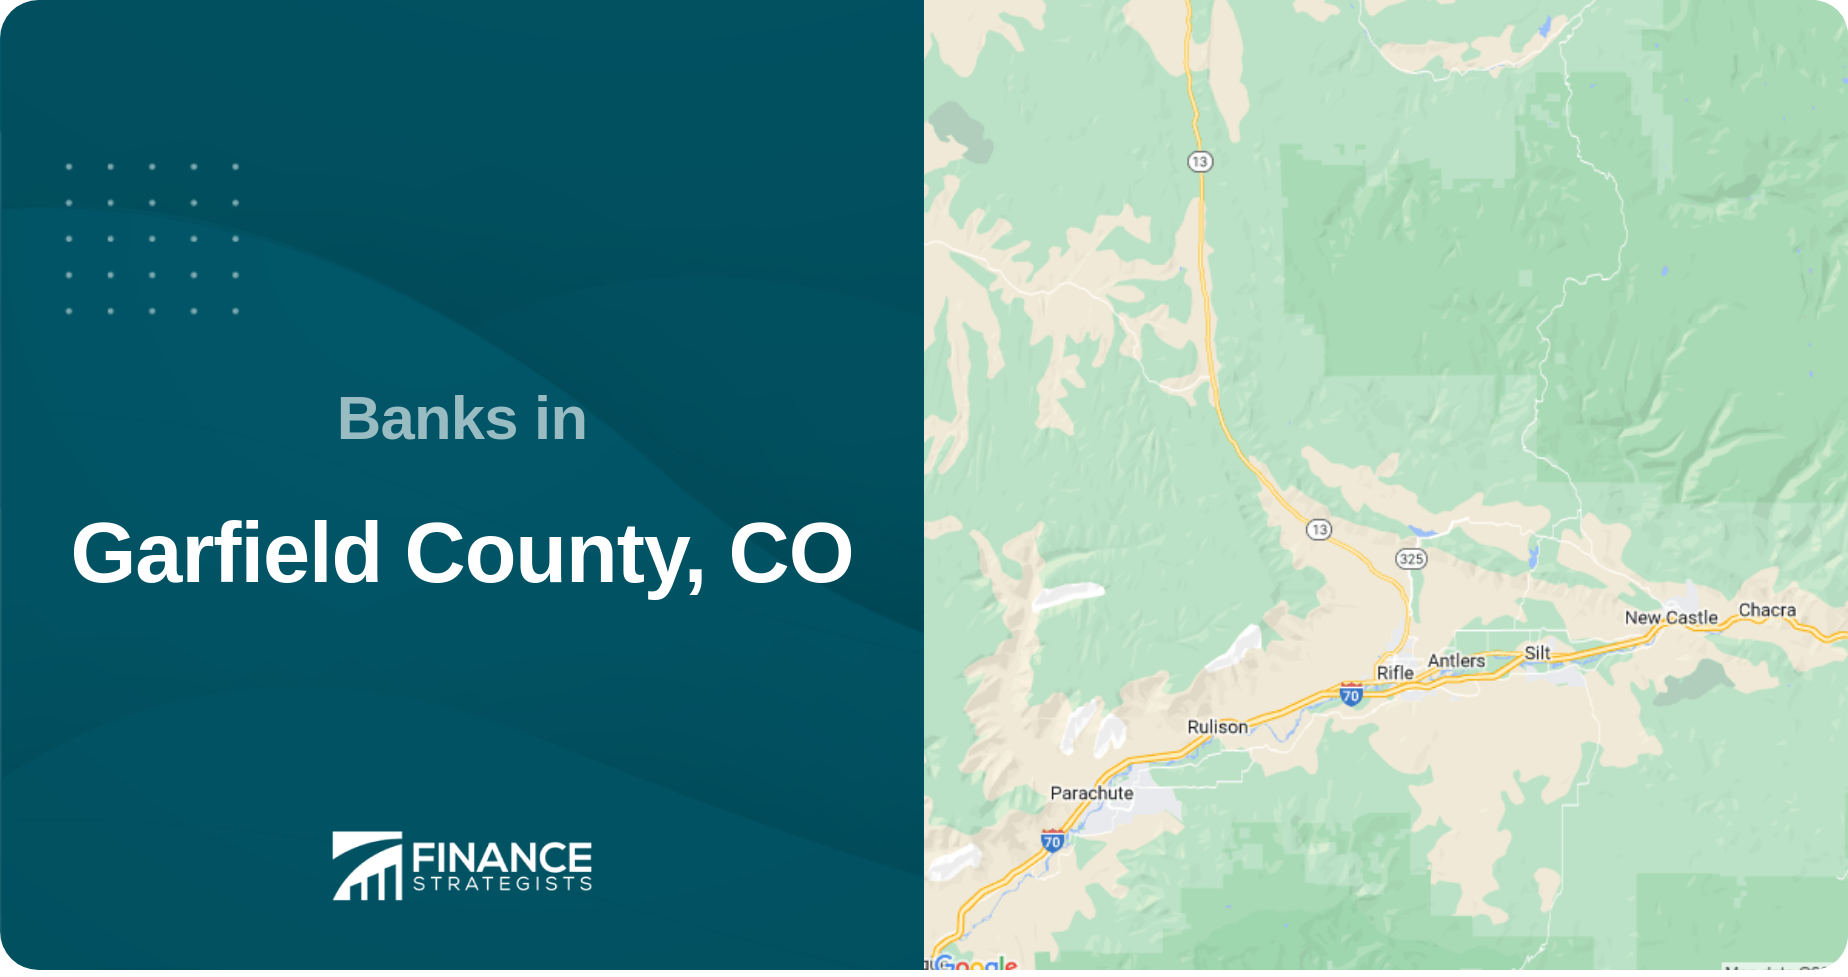 Banks in Garfield County, CO